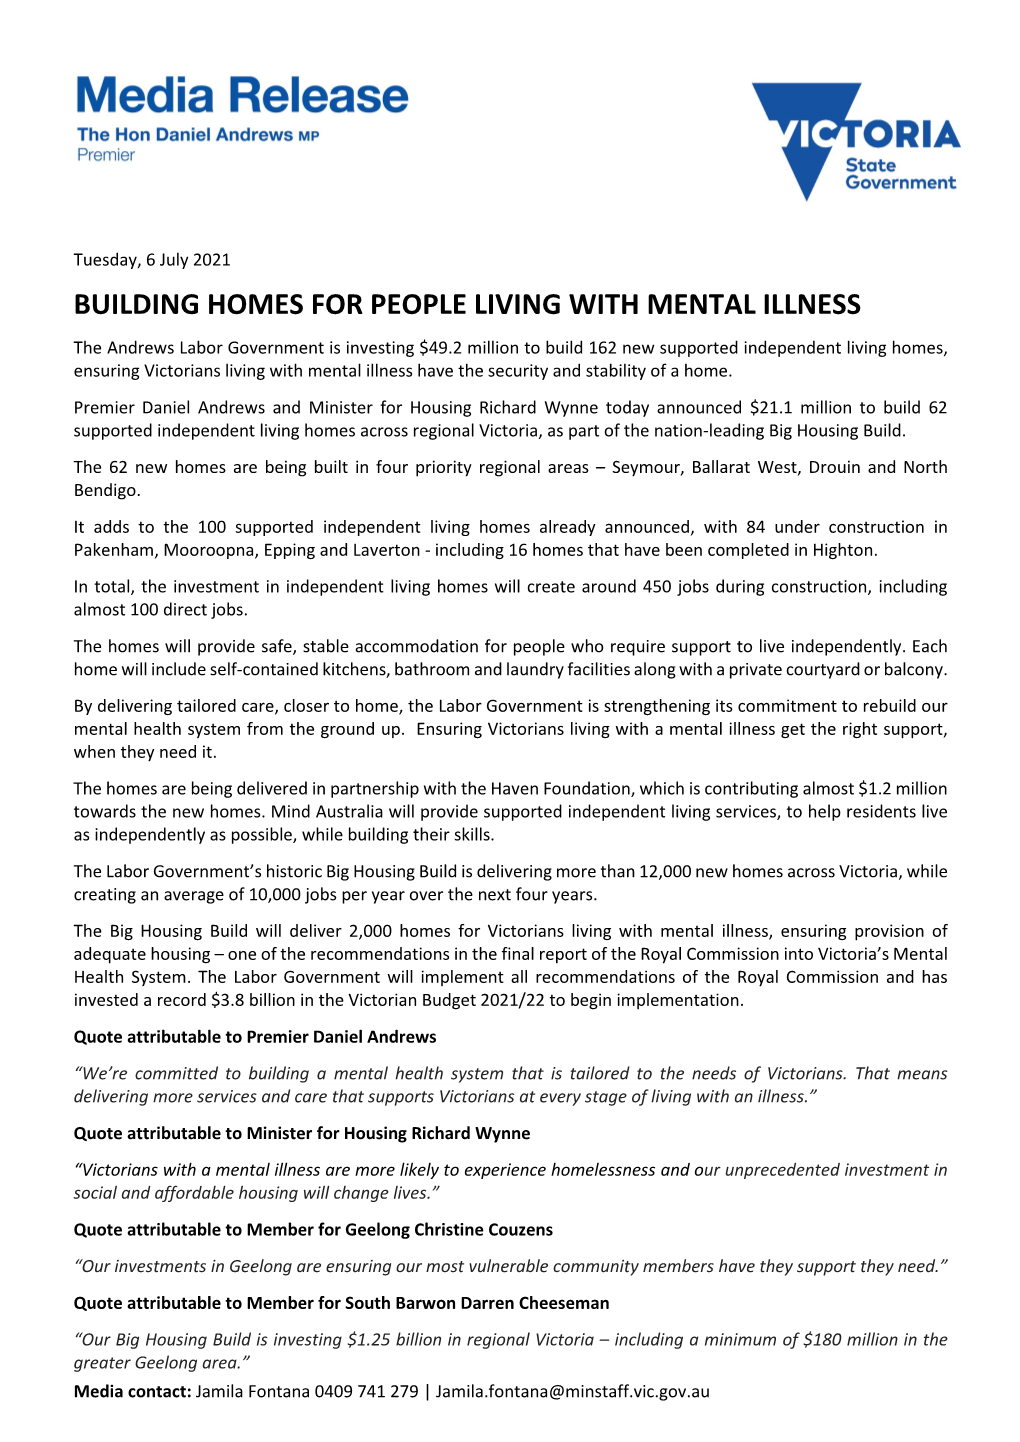 Building Homes for People Living with Mental Illness